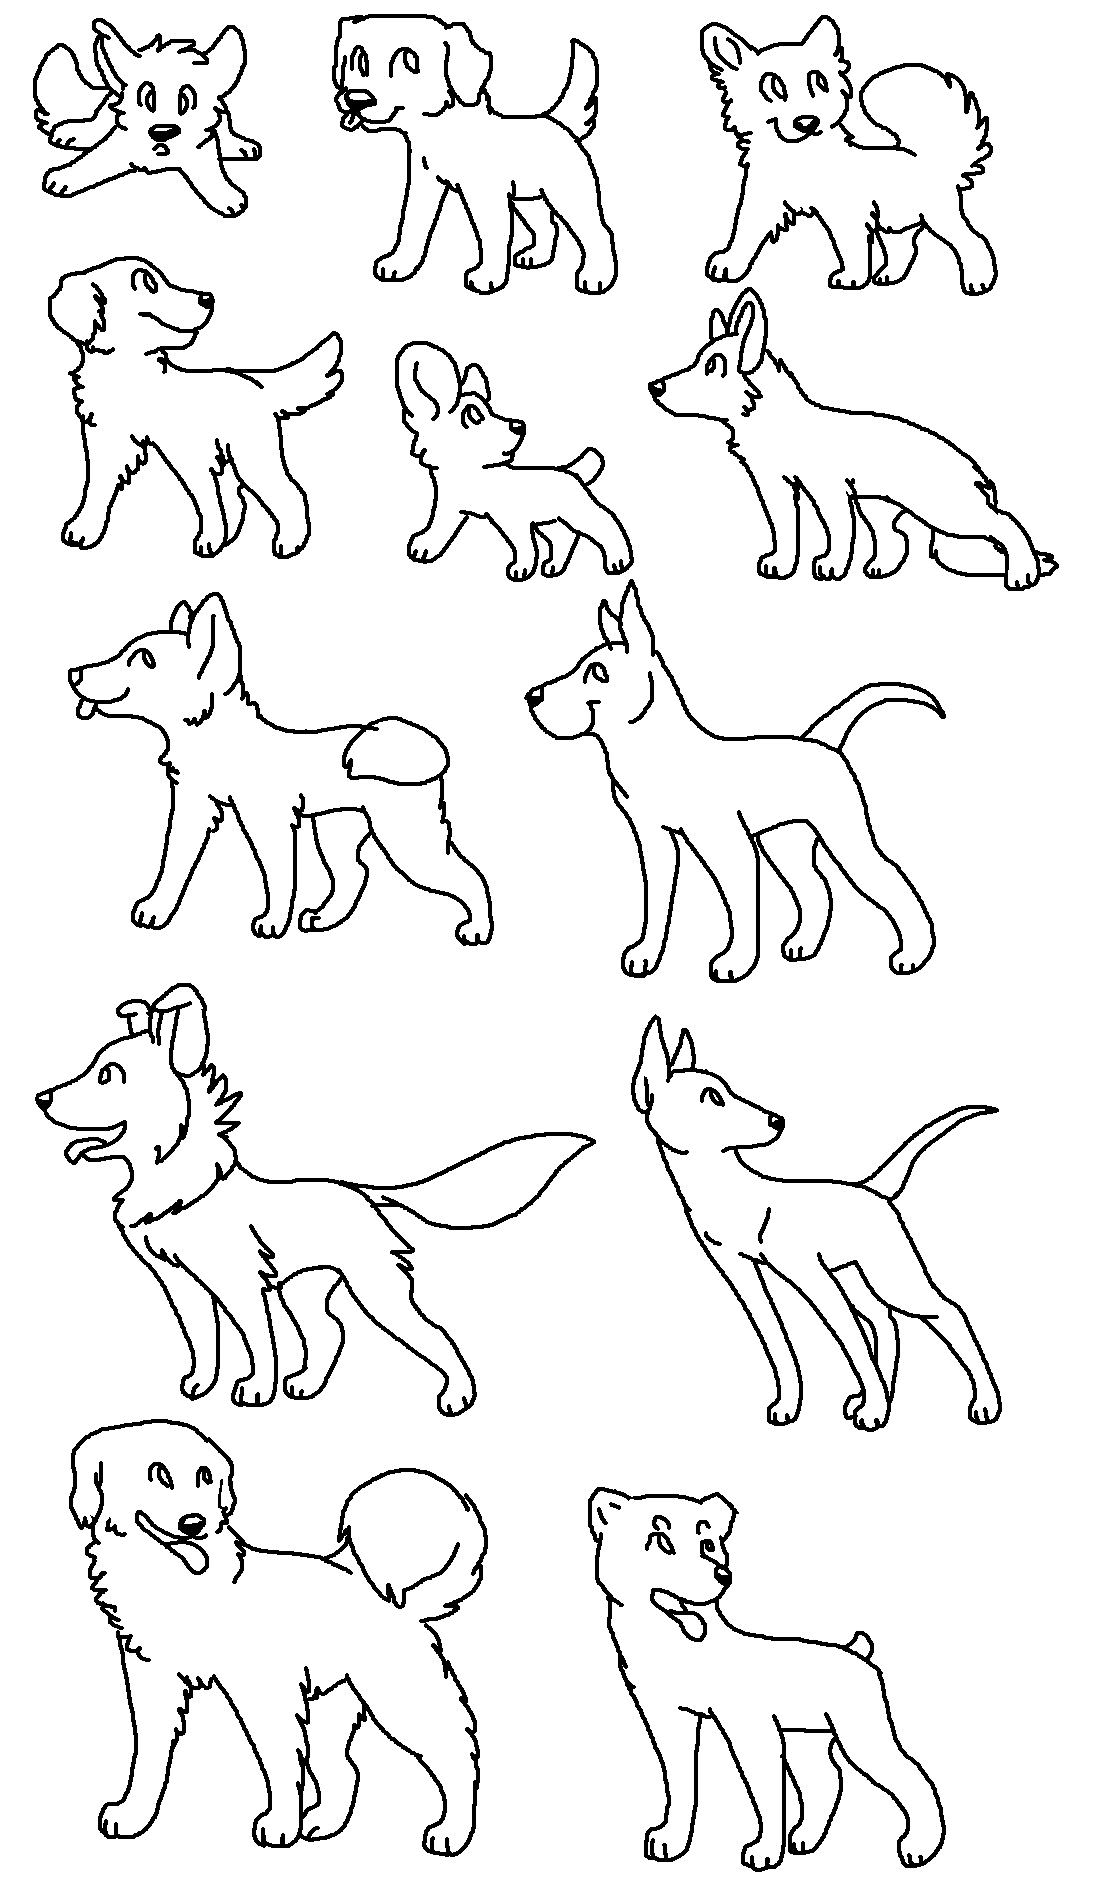 Free MS Paint Dog Breed Batch Lineart! by KayAdoptables on DeviantArt